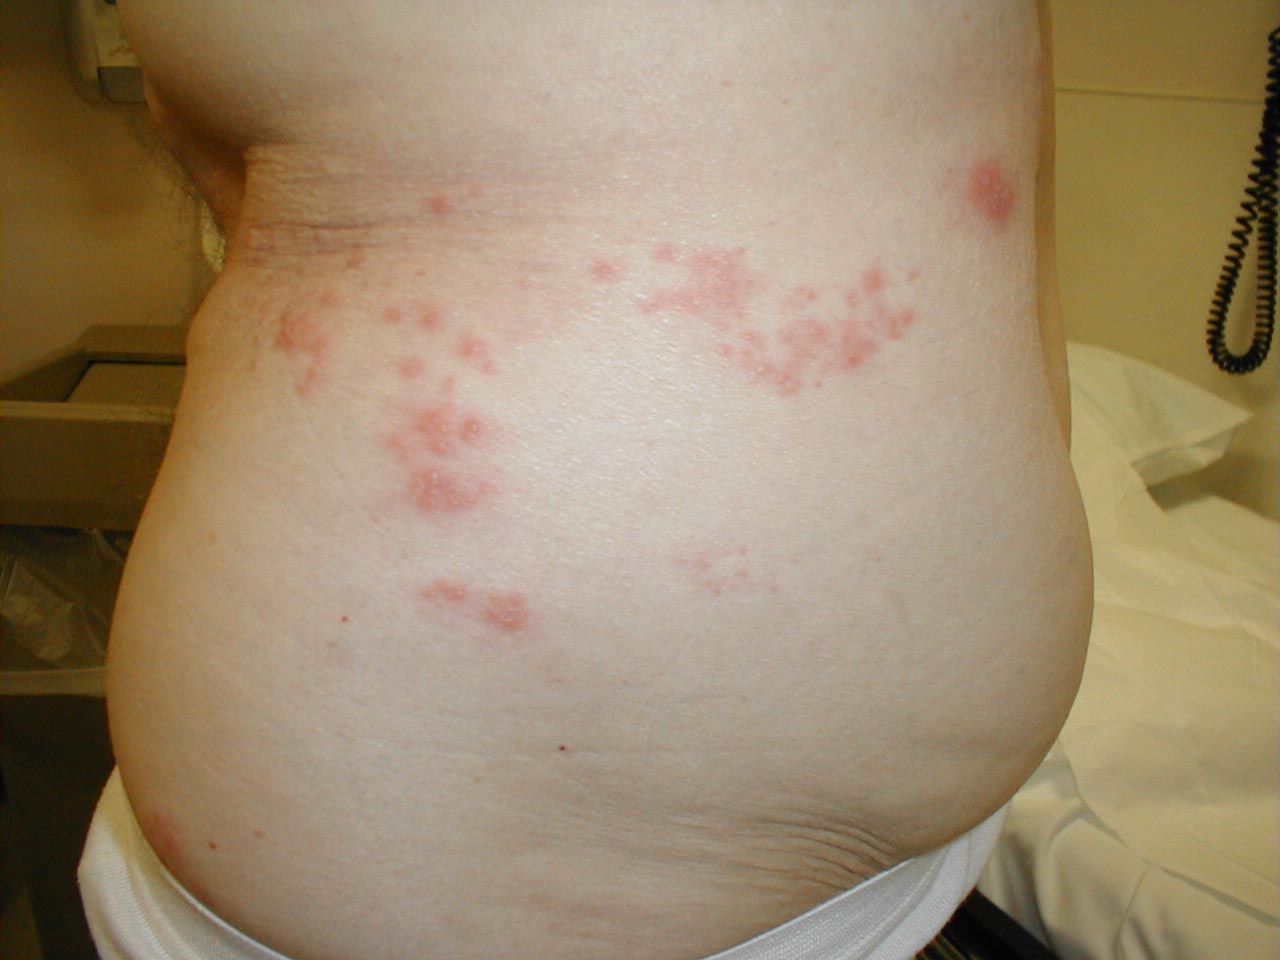 Herpes Zoster: Dermatomally distributed vesicles in patient with HZV infection.